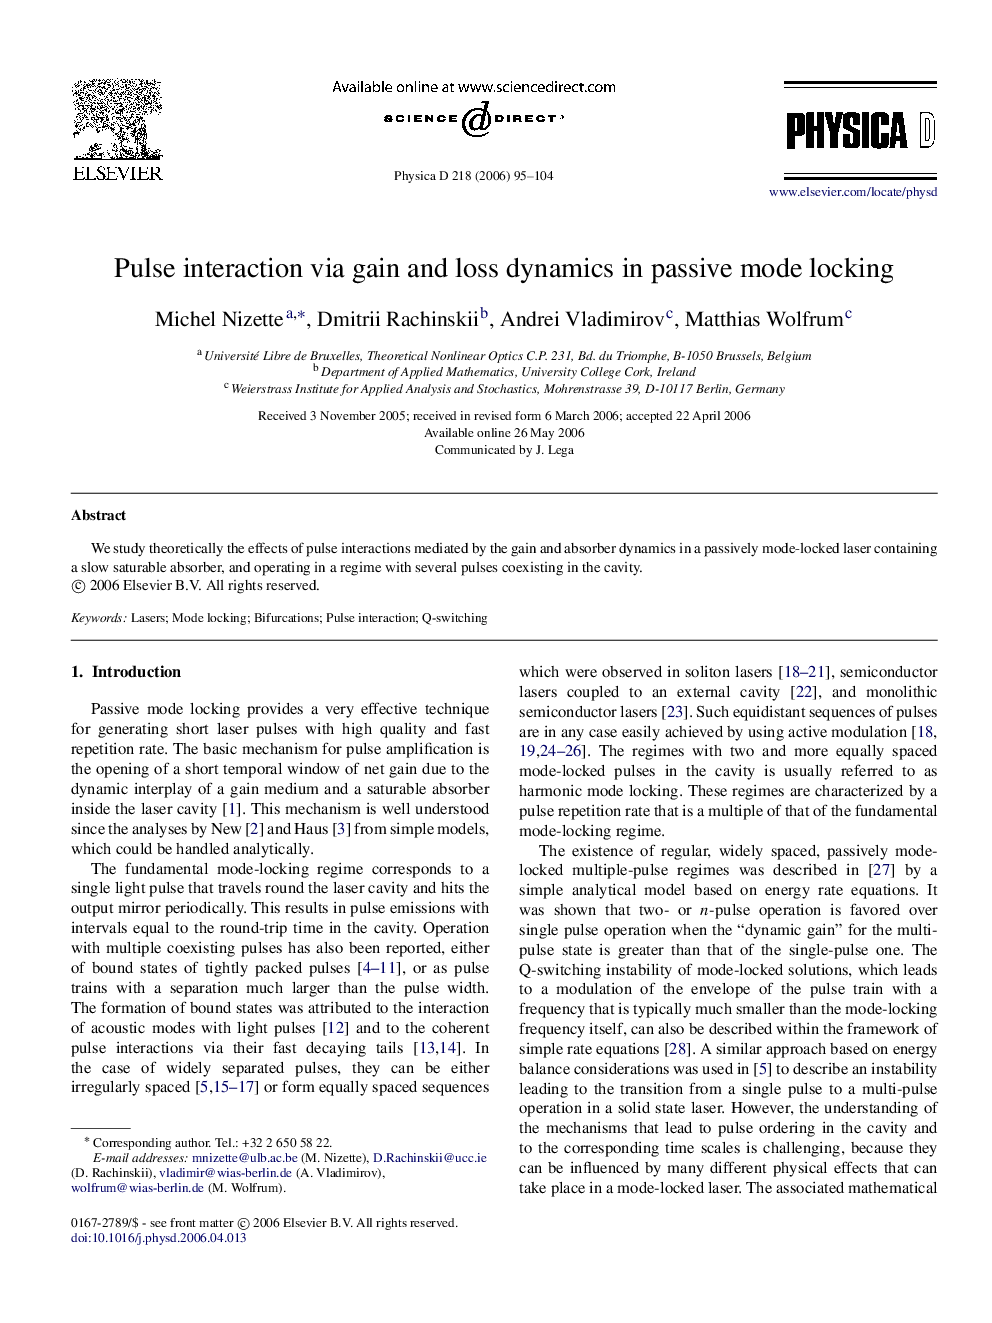 Pulse interaction via gain and loss dynamics in passive mode locking